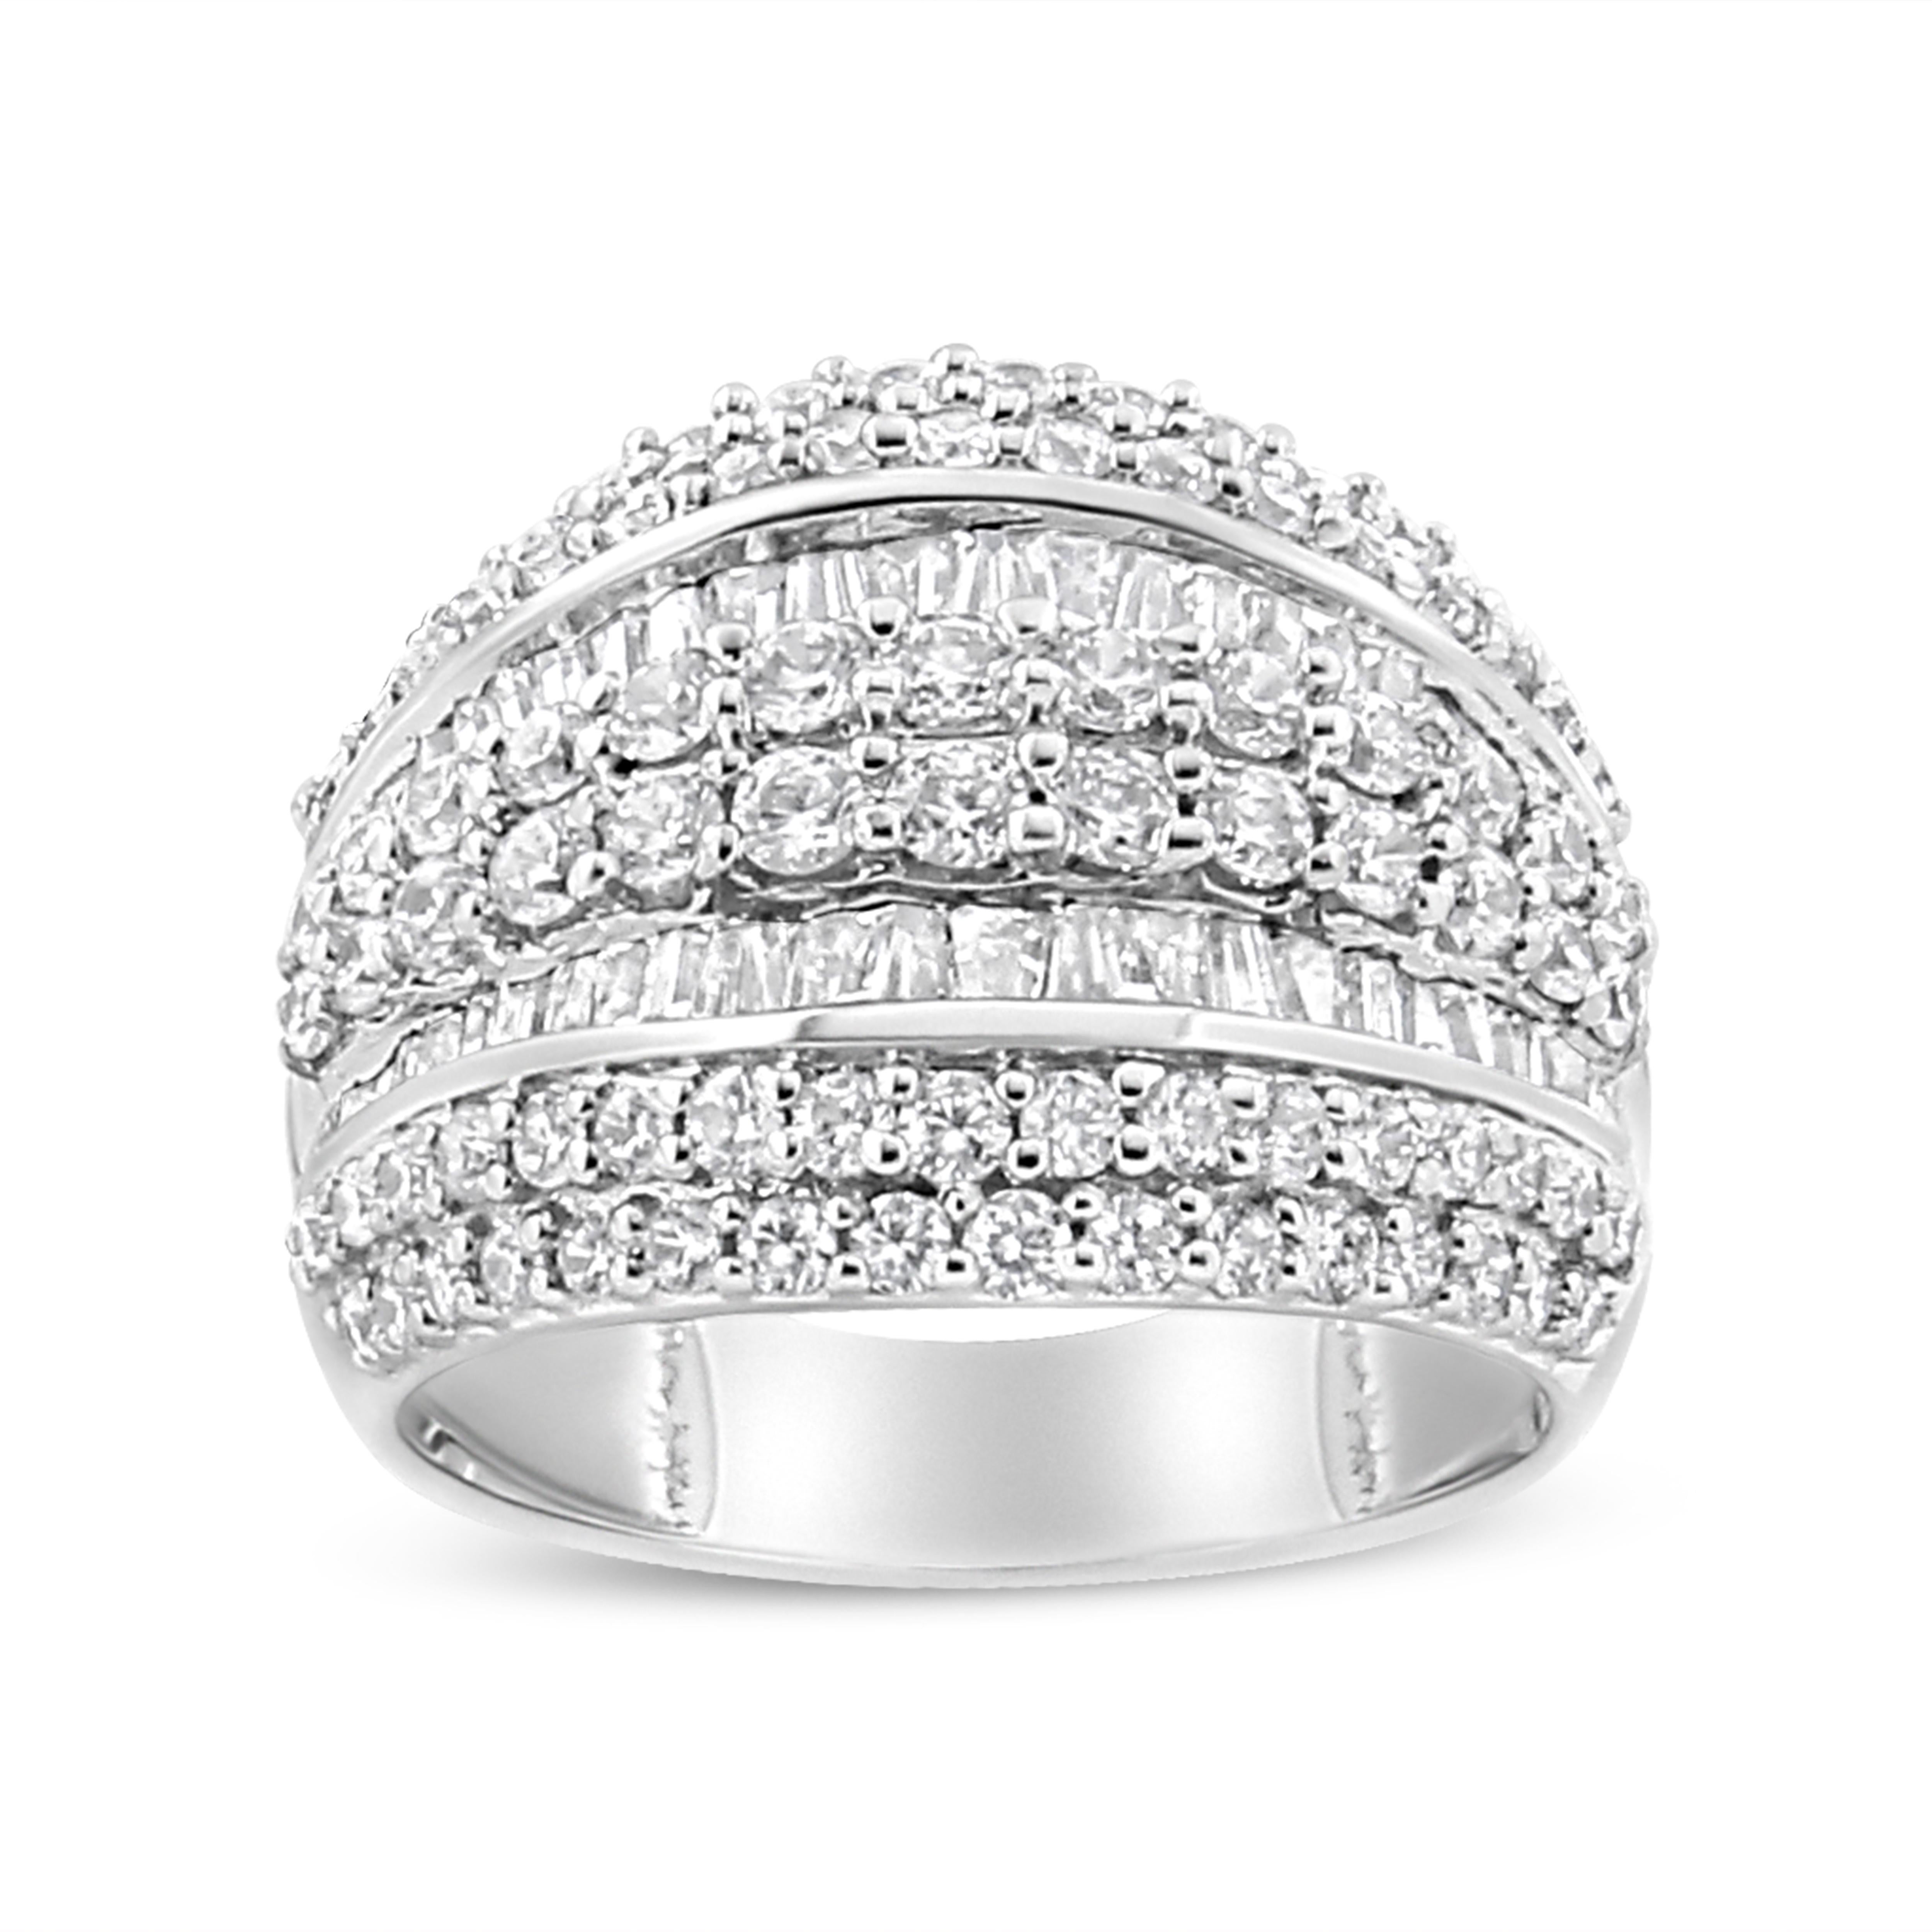 Bold and brilliant, this magnificent cluster diamond ring has an impressive total carat weight of 2.00 c.t. This piece is crafted in genuine .925 sterling silver, a metal that will stay tarnish free for years to come. The ring shines with